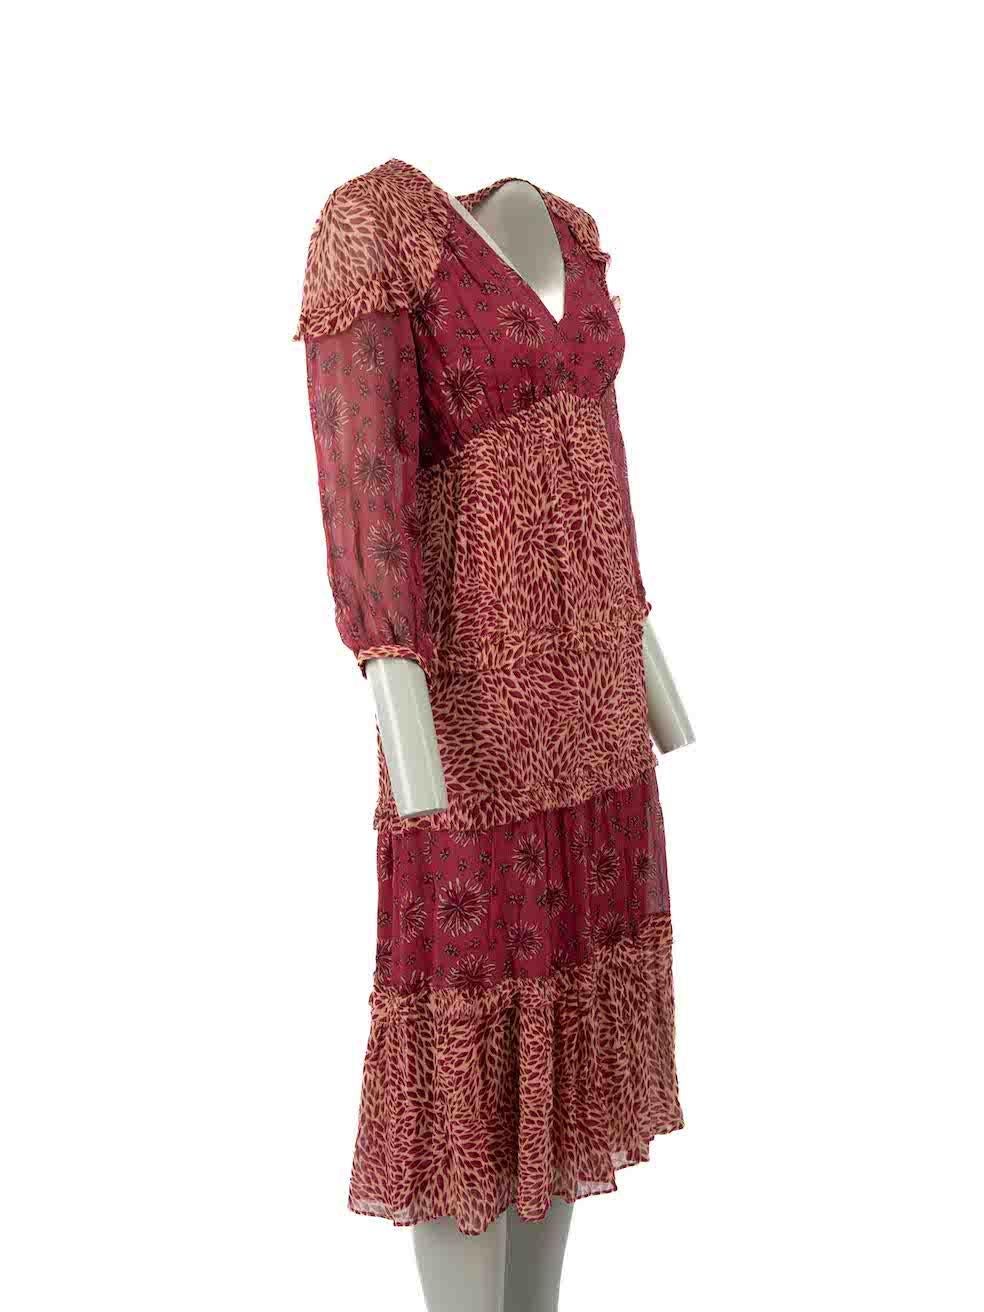 CONDITION is Never worn, with tags. No visible wear to dress is evident on this new ba&sh designer resale item.
 
Details
Burgundy
Viscose
Dress
V-neck
Long sleeves
Floral print
Midi
 
Made in China
 
Composition
100% Viscose
Care instructions:¬†